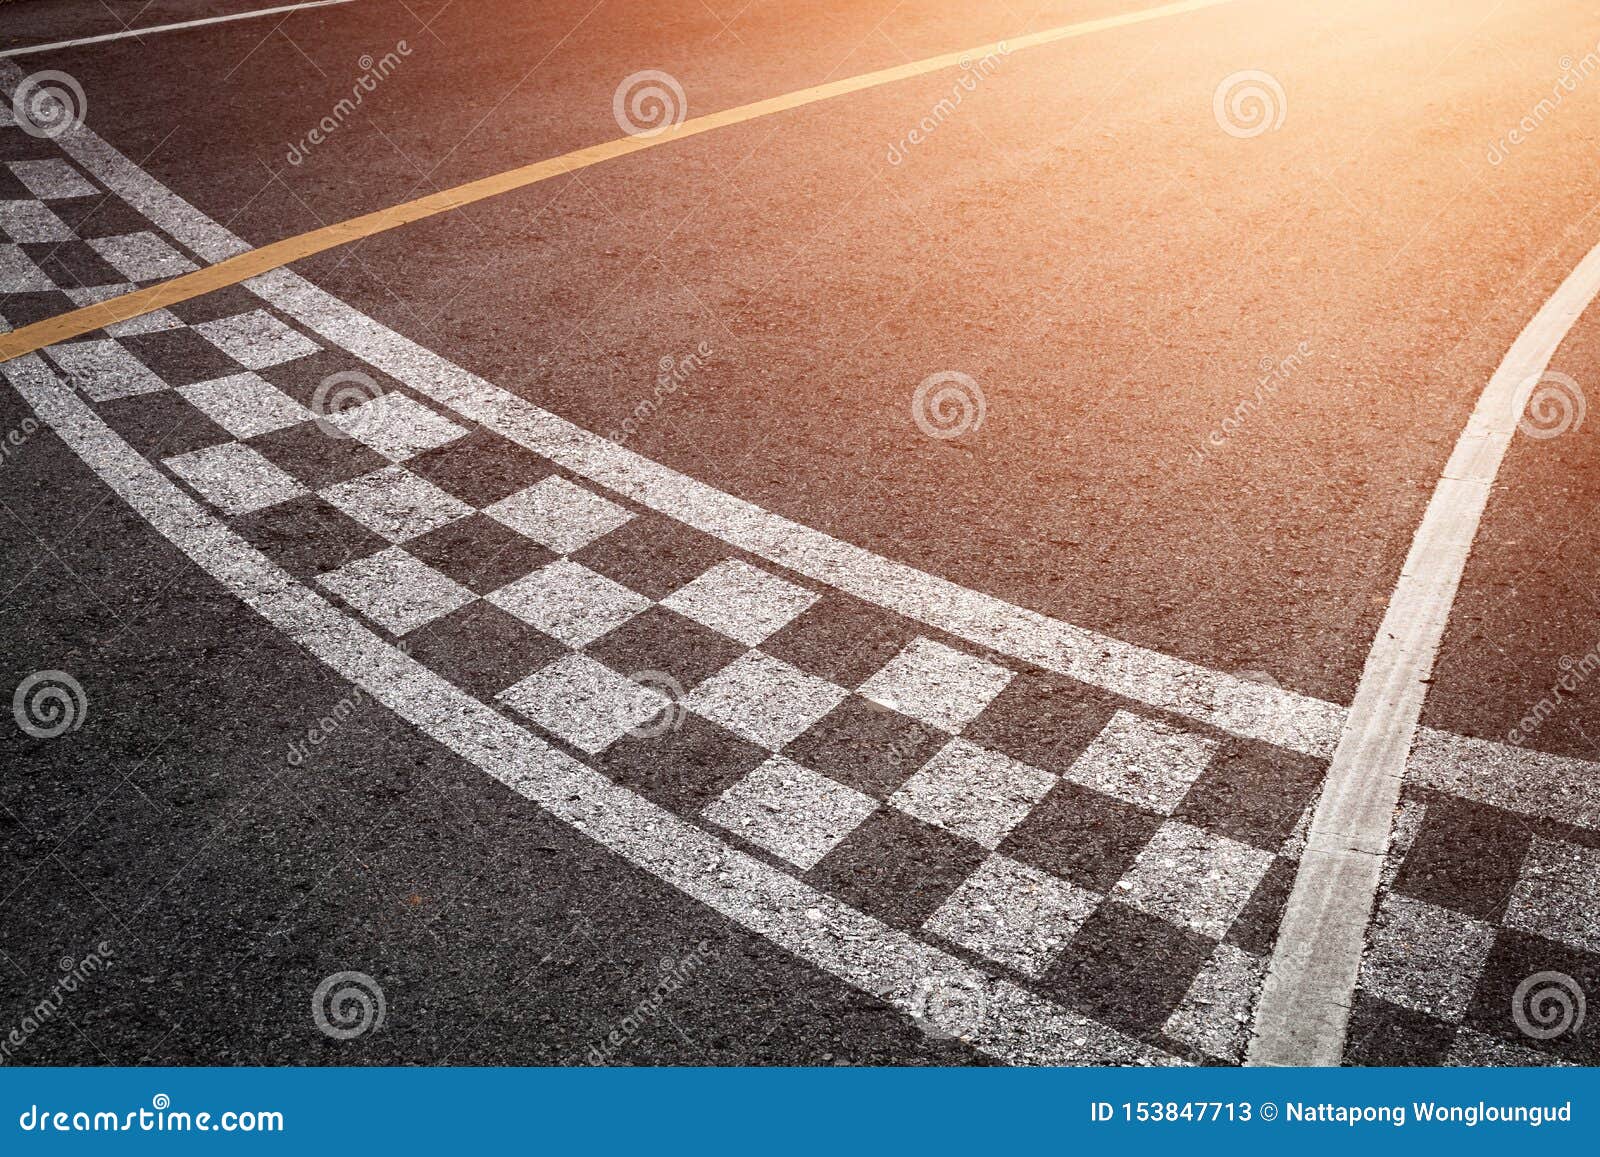 the beginning of racing on the road racetrack background